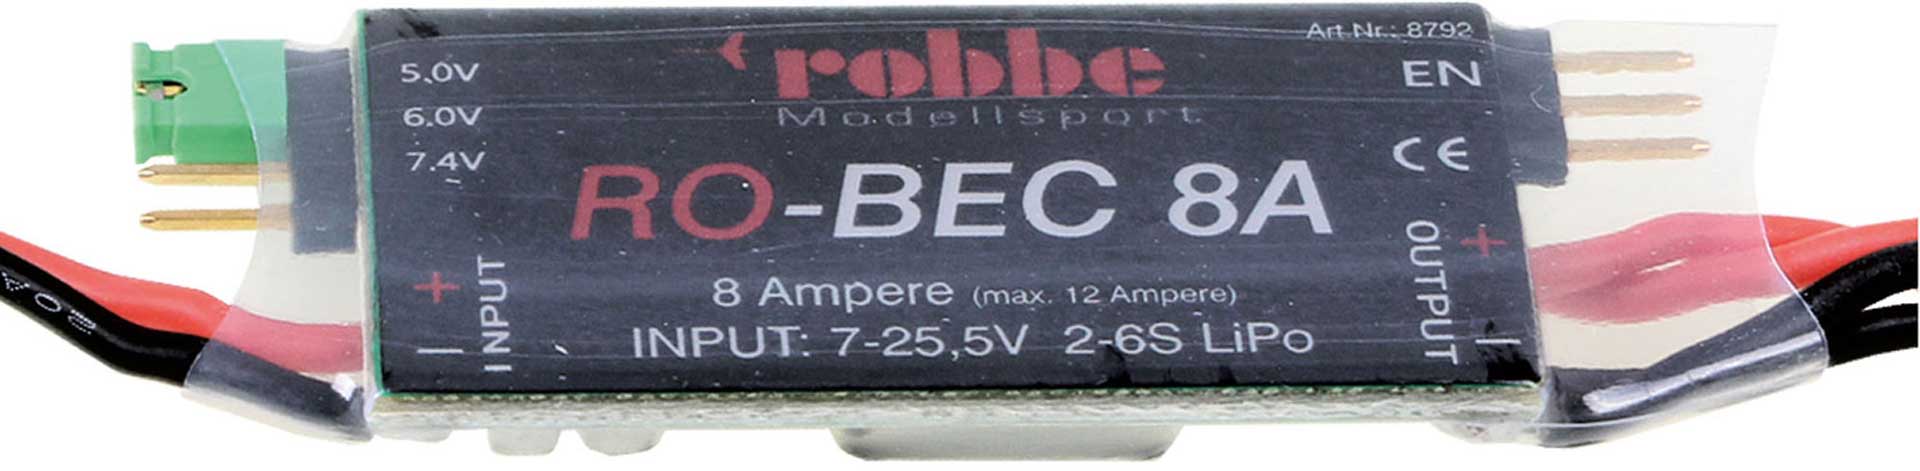 Robbe Modellsport RO-BEC 8A RECEIVER POWER SUPPLY